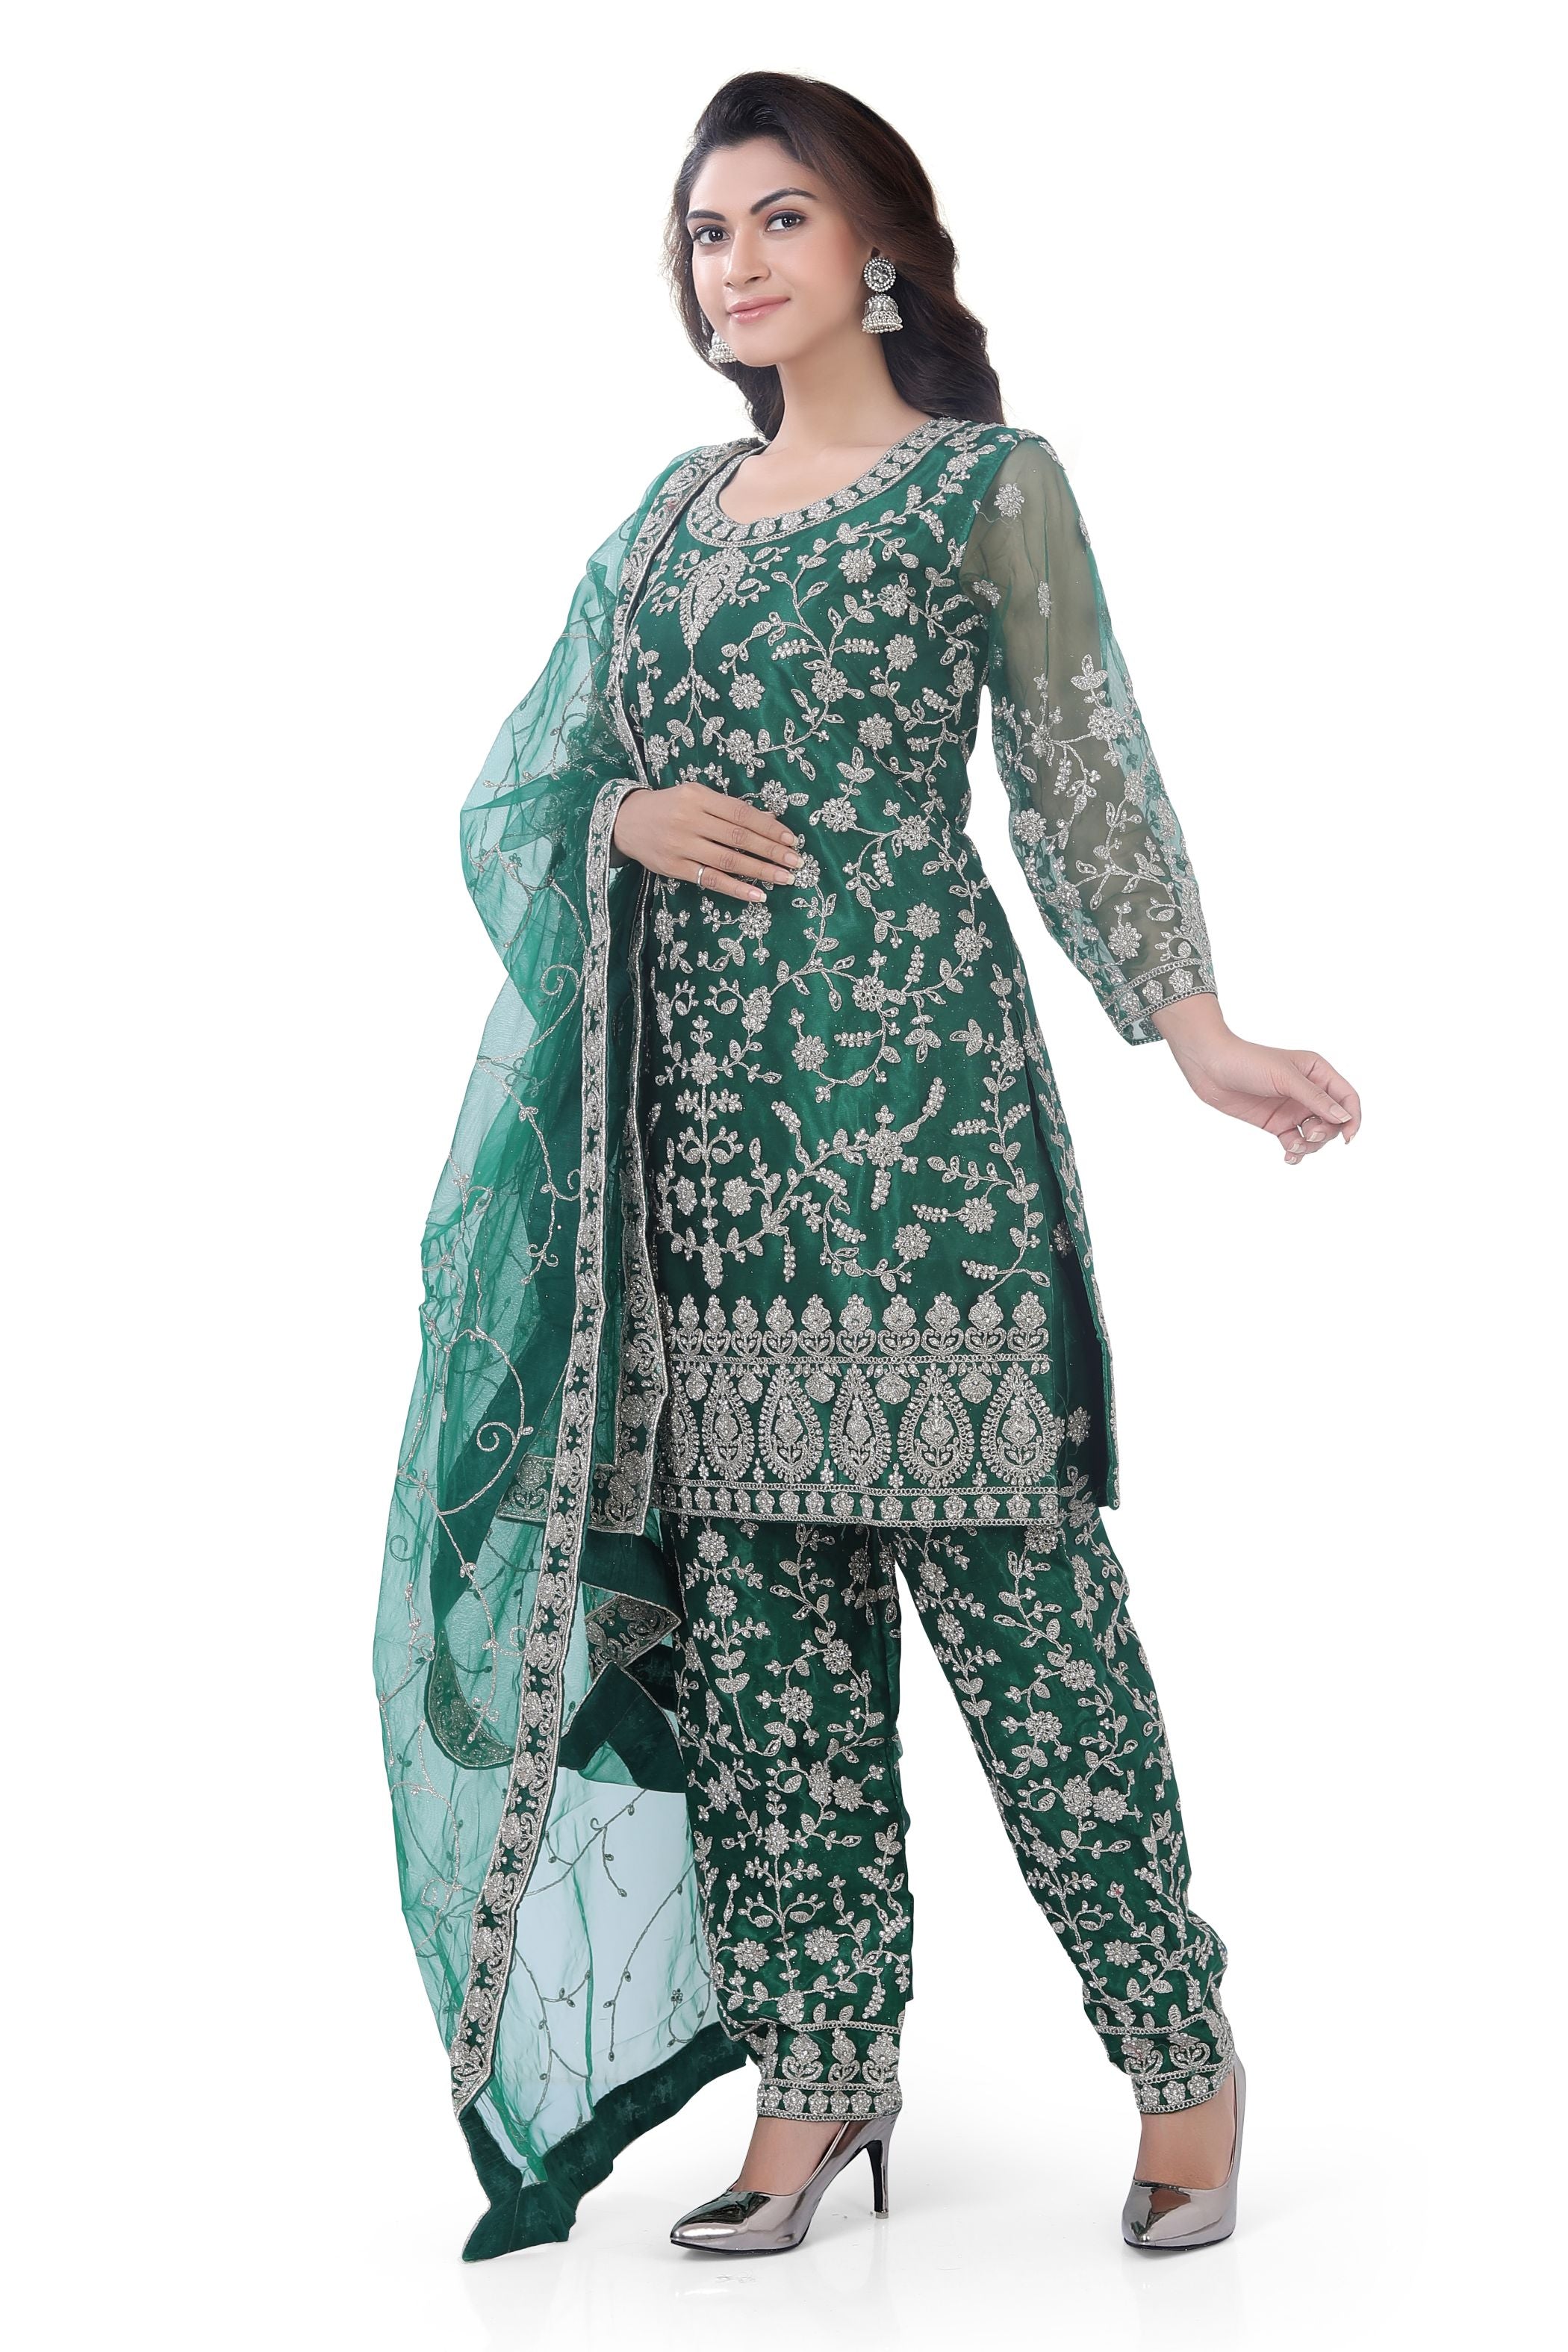 Heavy Embroidered Short Anarkali with Pencil Pant in Bottle Green Colour D.No.1